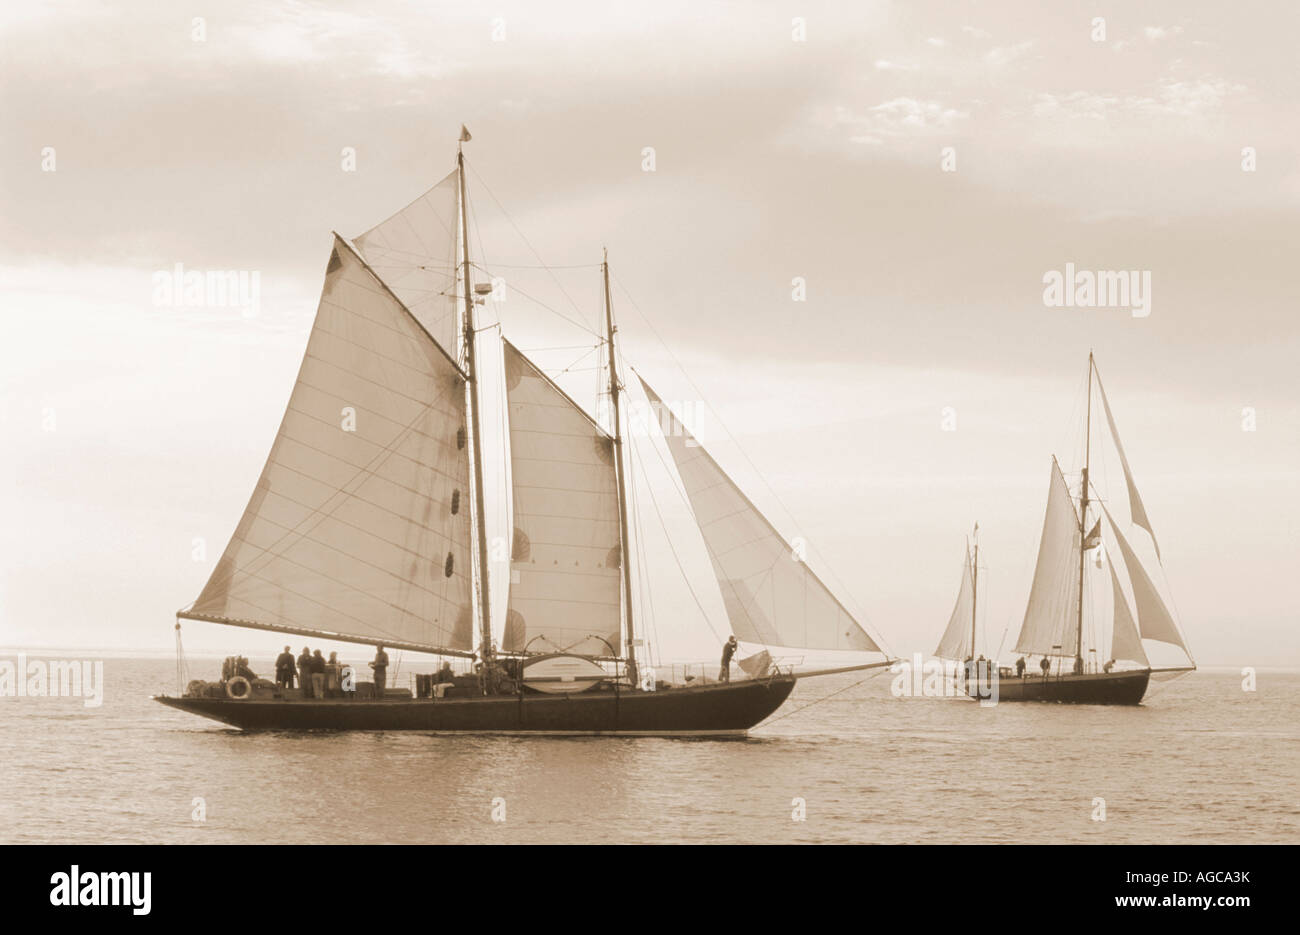 Sepia image of the restored 1909 British built gaff rigged schooner Hoshi under sail in calm sea Stock Photo